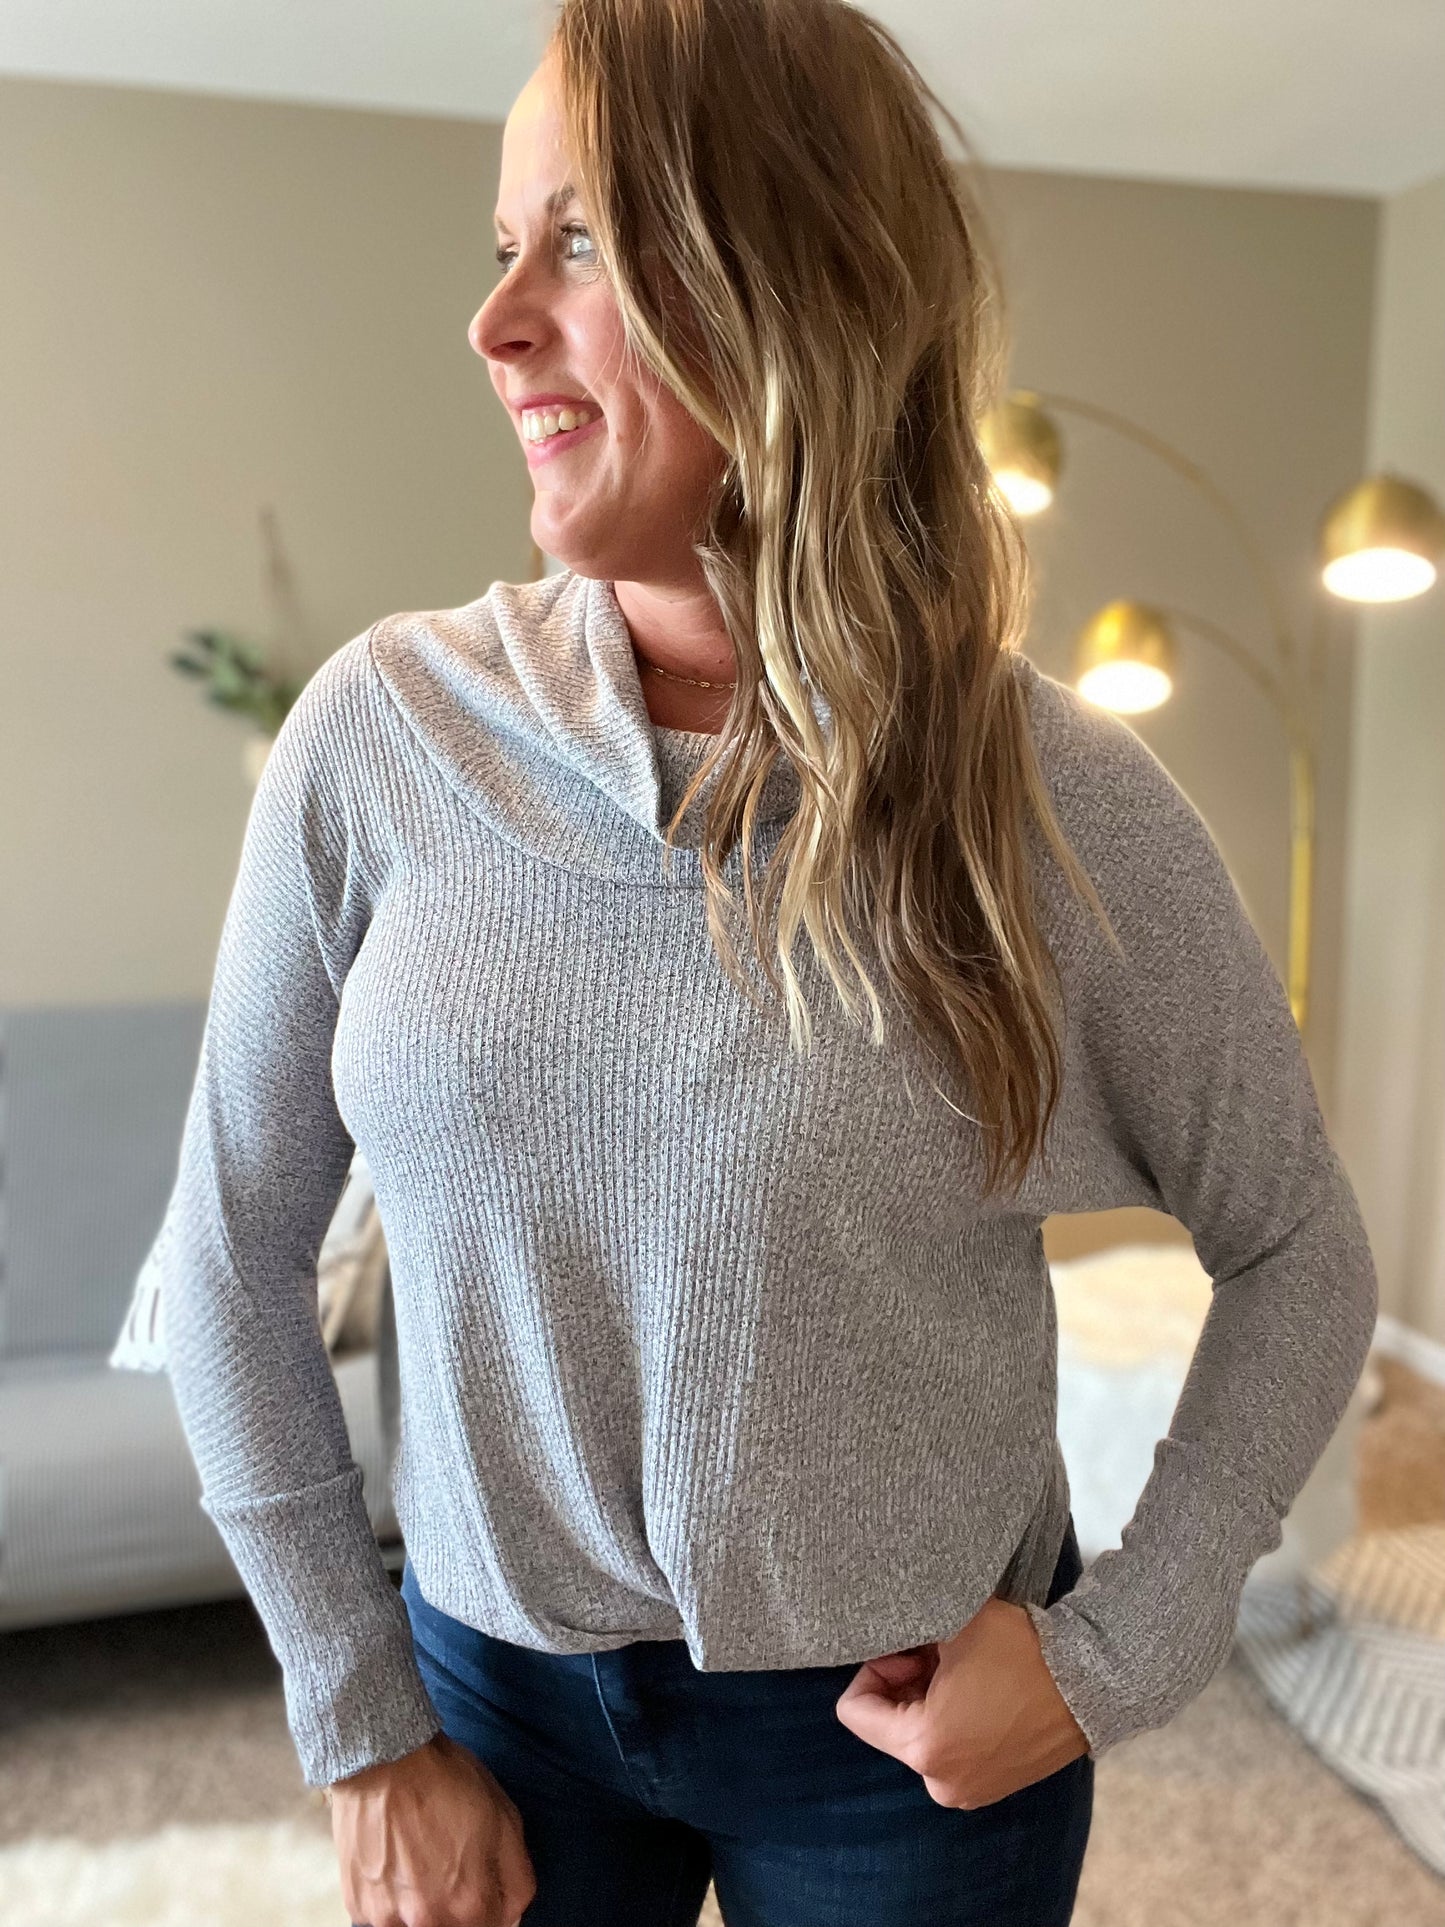 Cowl neck waffle knit top with draping detail in front - gray